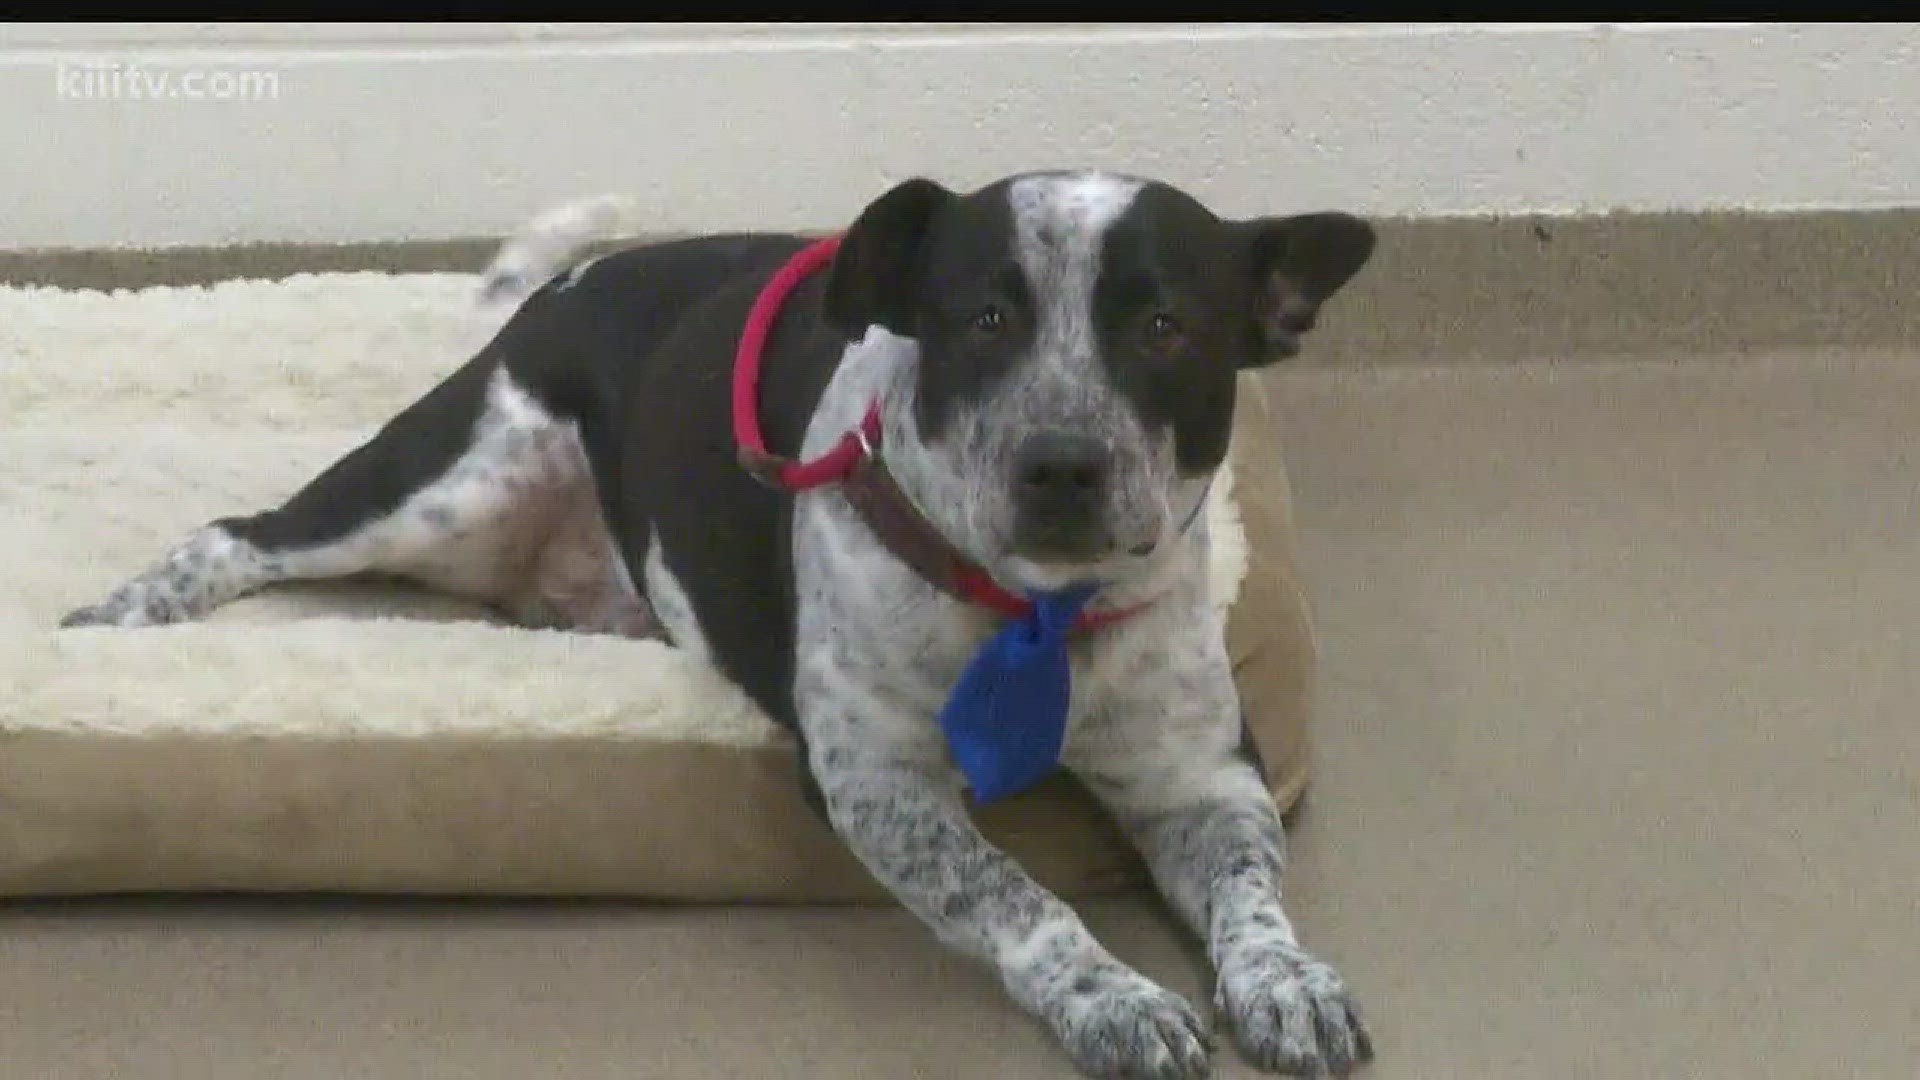 On Wednesday's Paws for Pets, Three News Anchor Kristin Diaz helps our four legged friend Archer find a forever home.